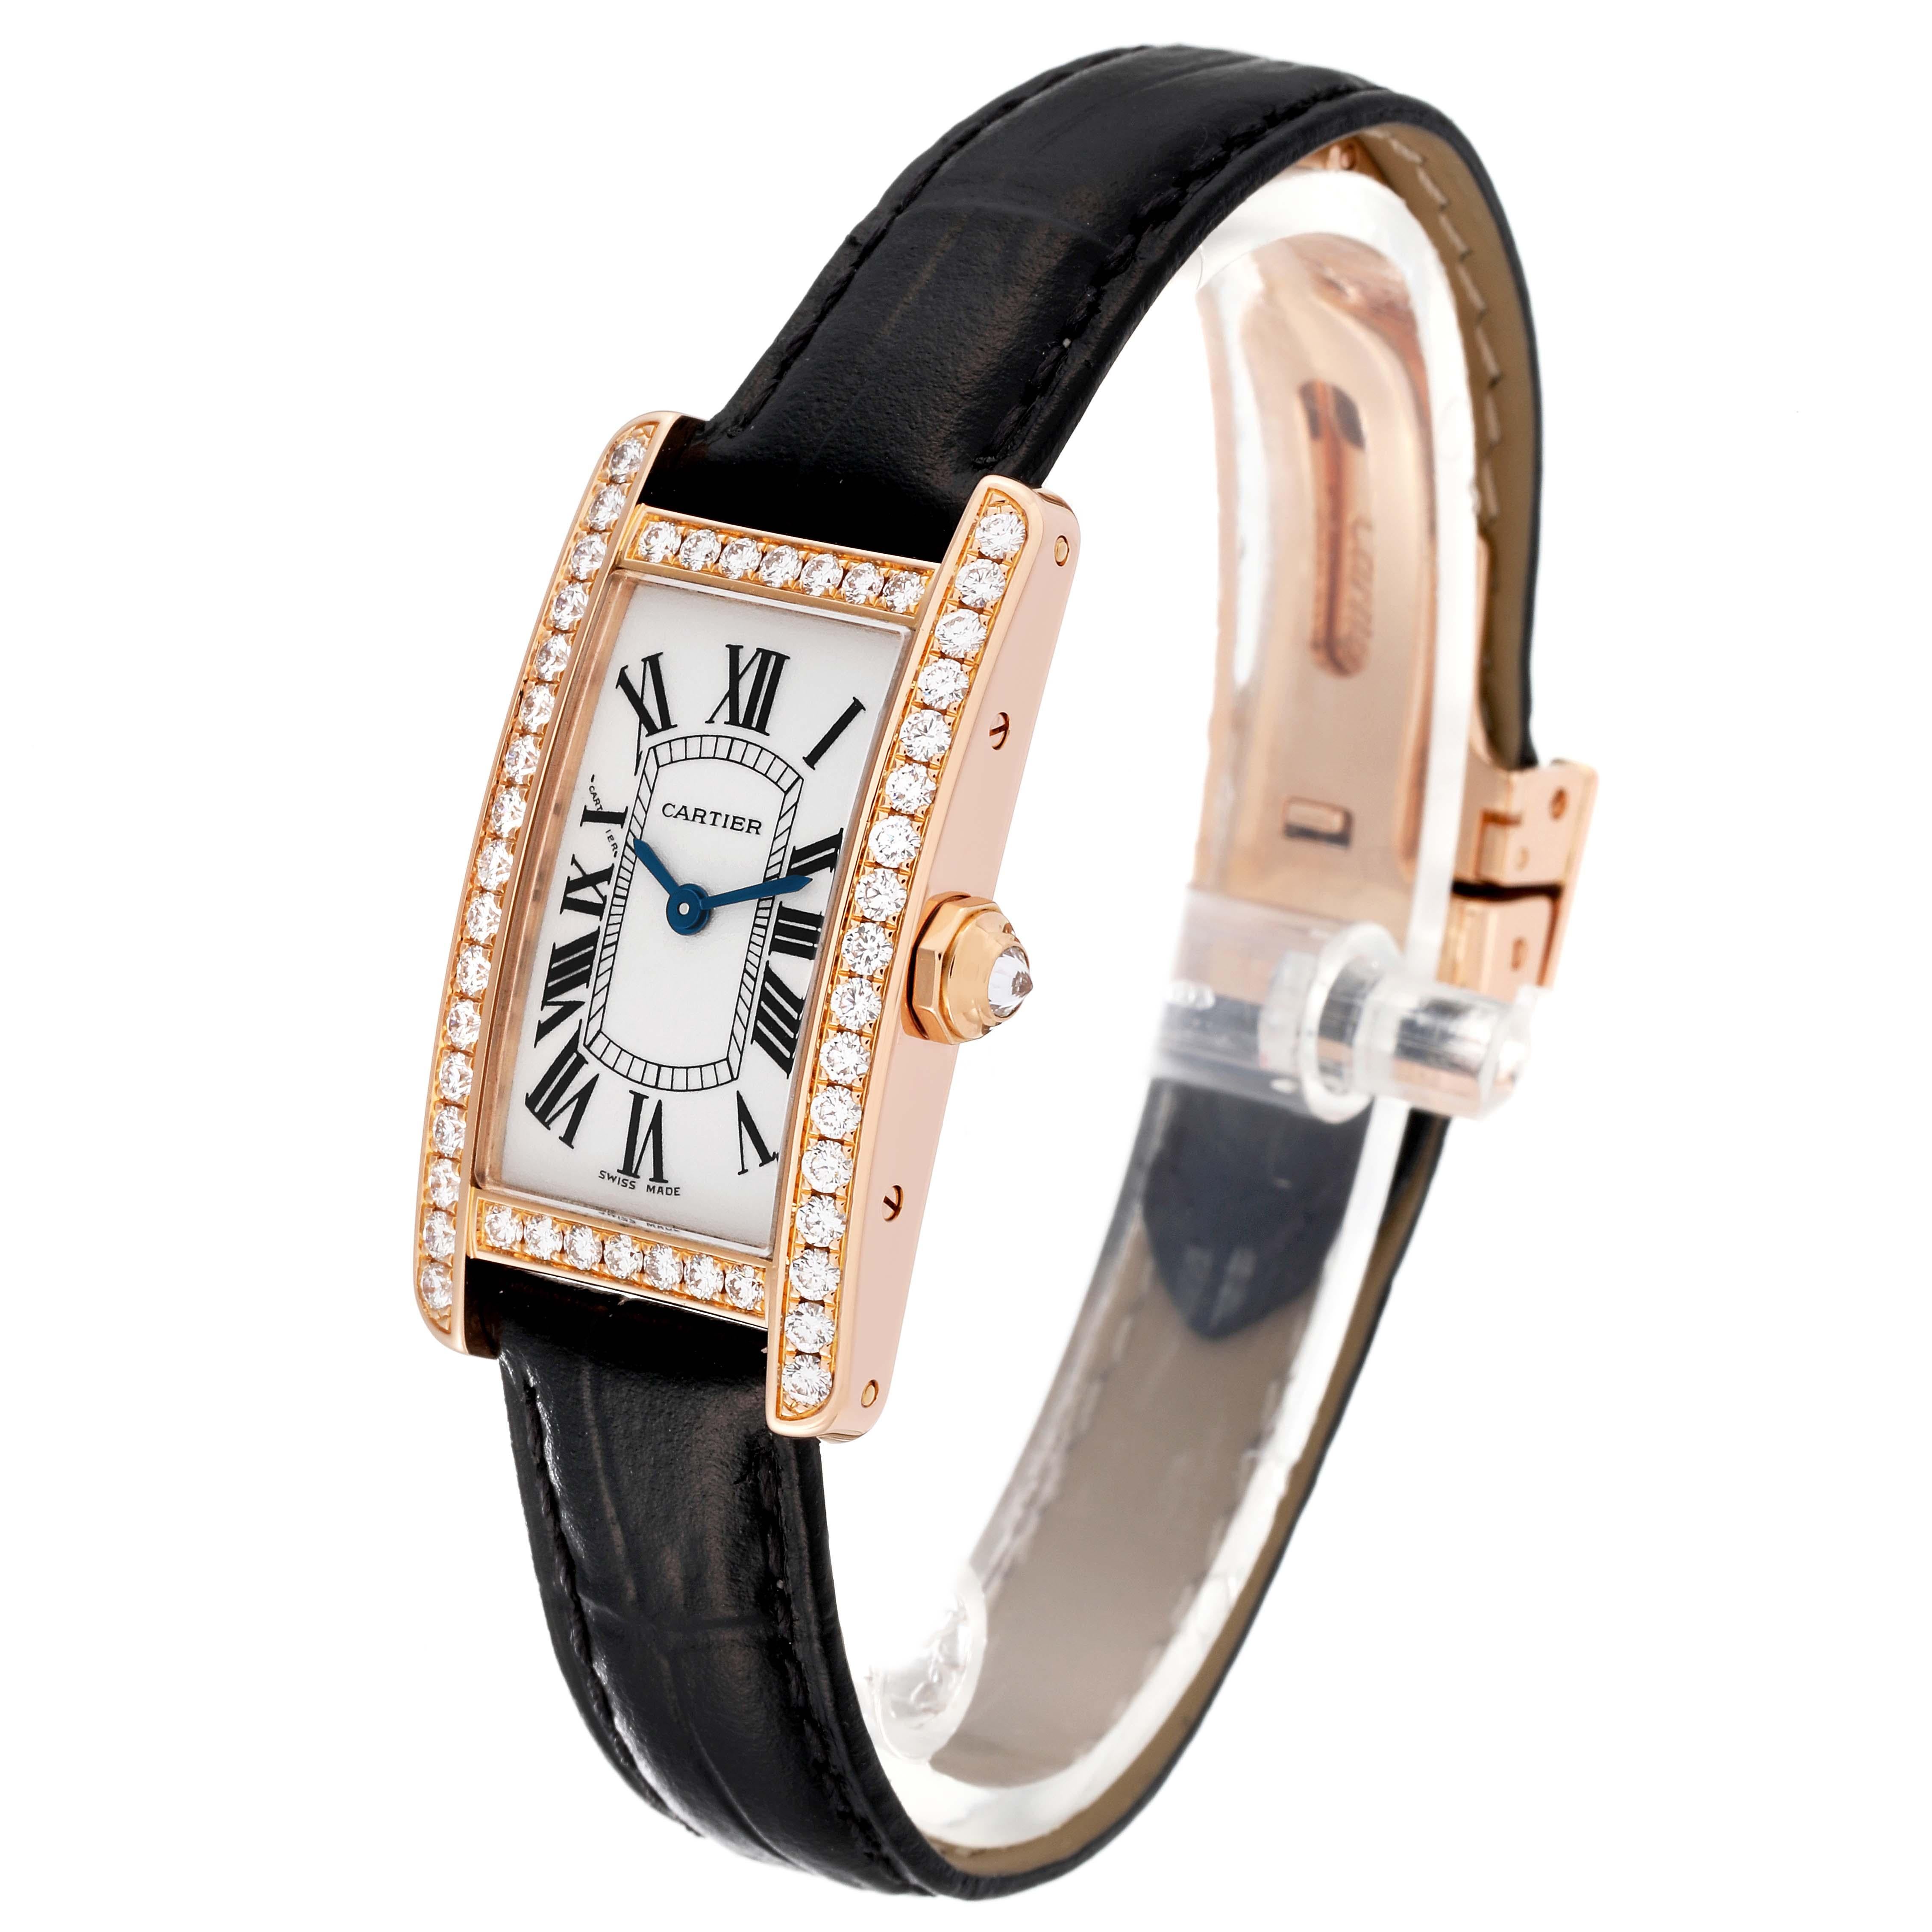 Cartier Tank Americaine Small Rose Gold Diamond Ladies Watch WJTA0002 For Sale 3